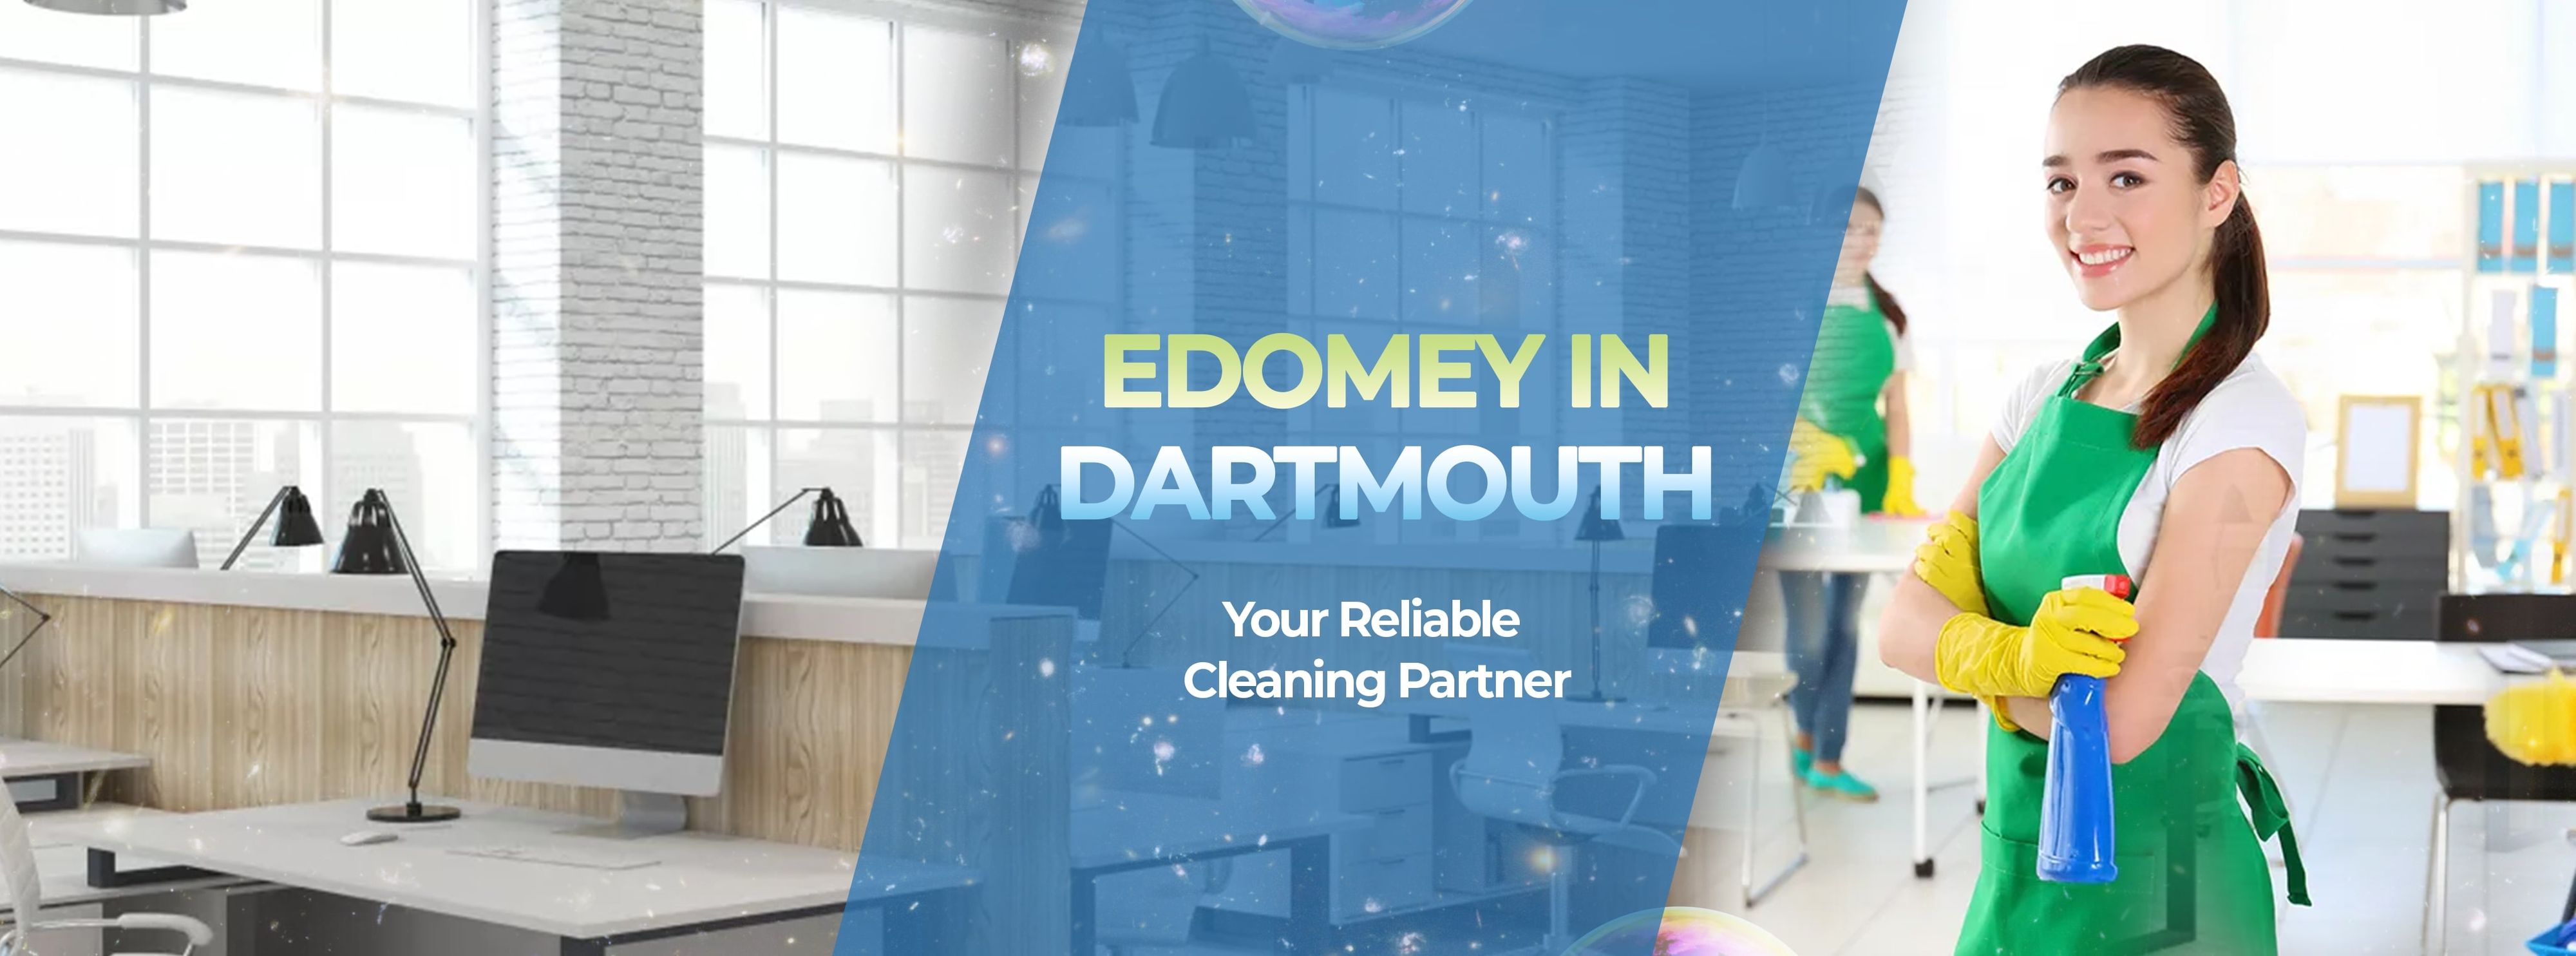 Commercial Cleaning Services in Dartmouth for offices, retail, restaurants 